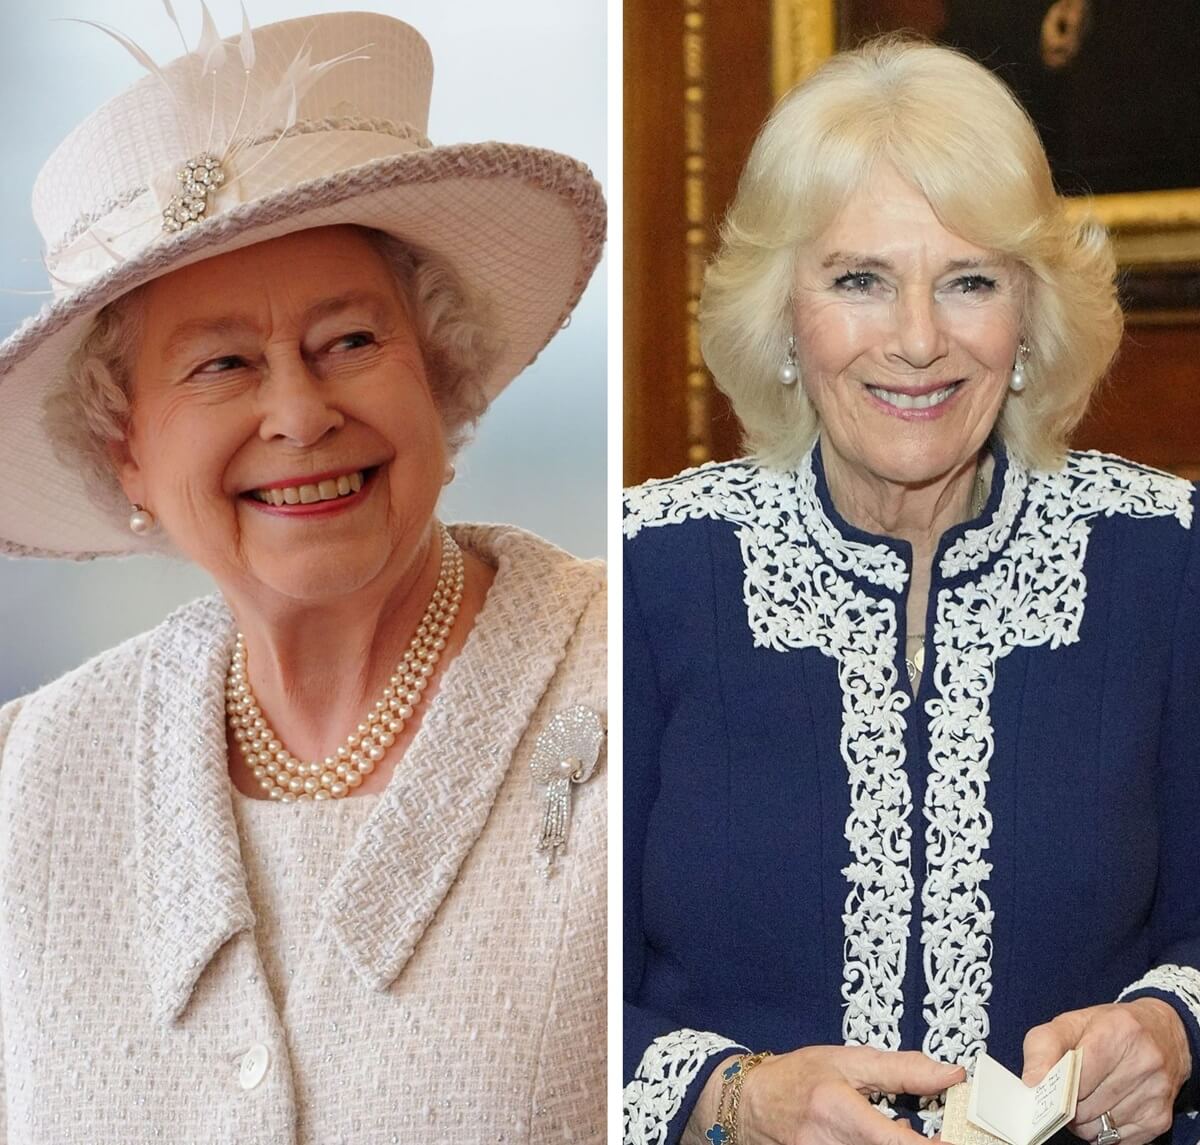 (L) Queen Elizabeth at an official welcoming ceremony for Turkey's president, (R) Queen Camilla holds a reception for authors at Windsor Castle